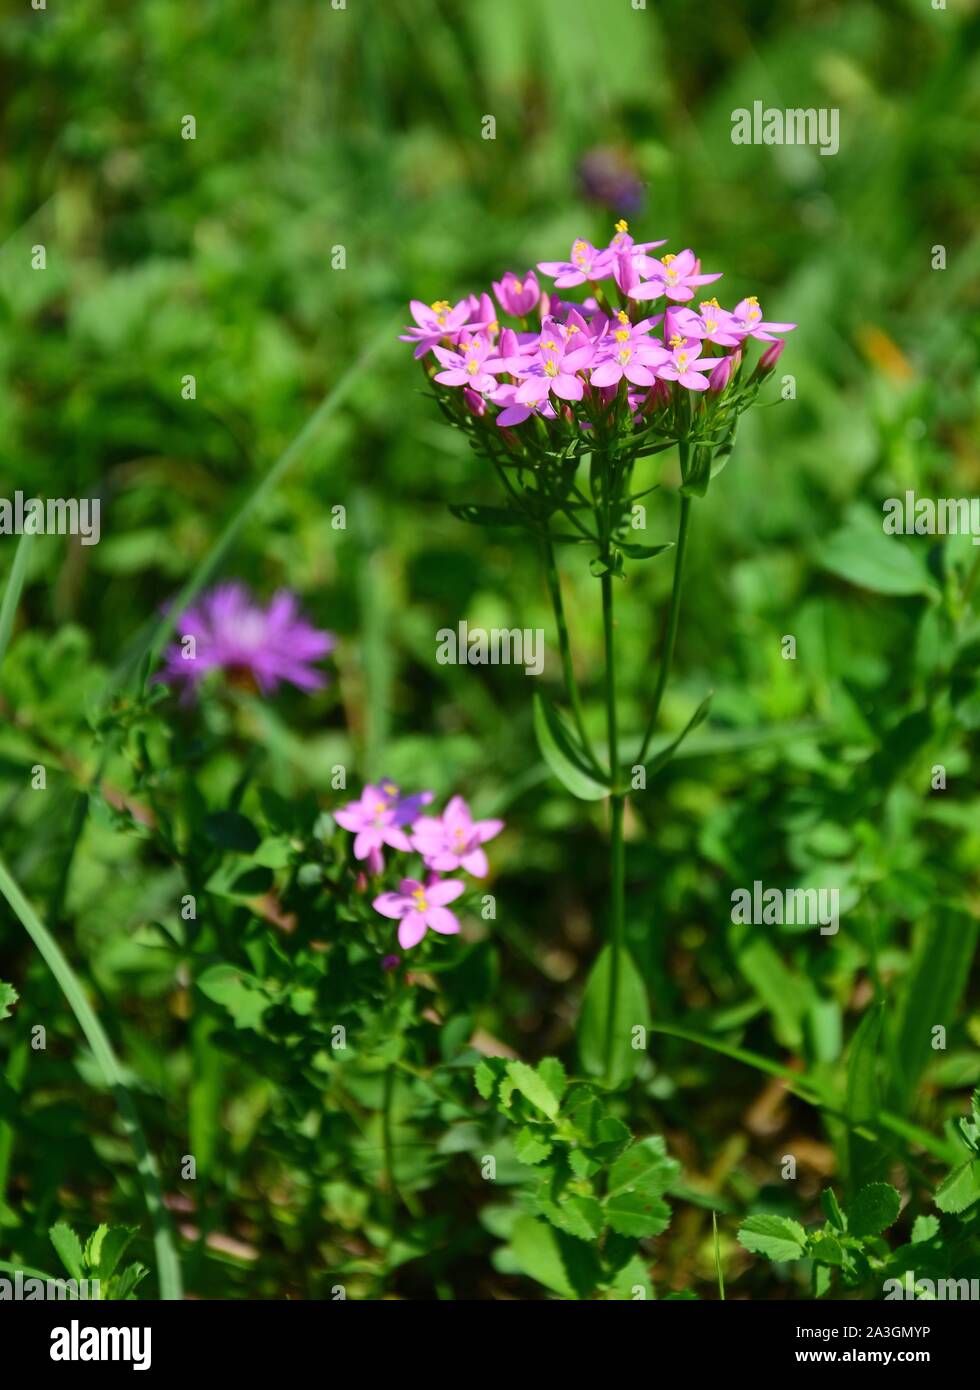 Centaurium erythraea is a species of flowering plant in the gentian family known by the common names common centaury and European centaury. Vertical Stock Photo